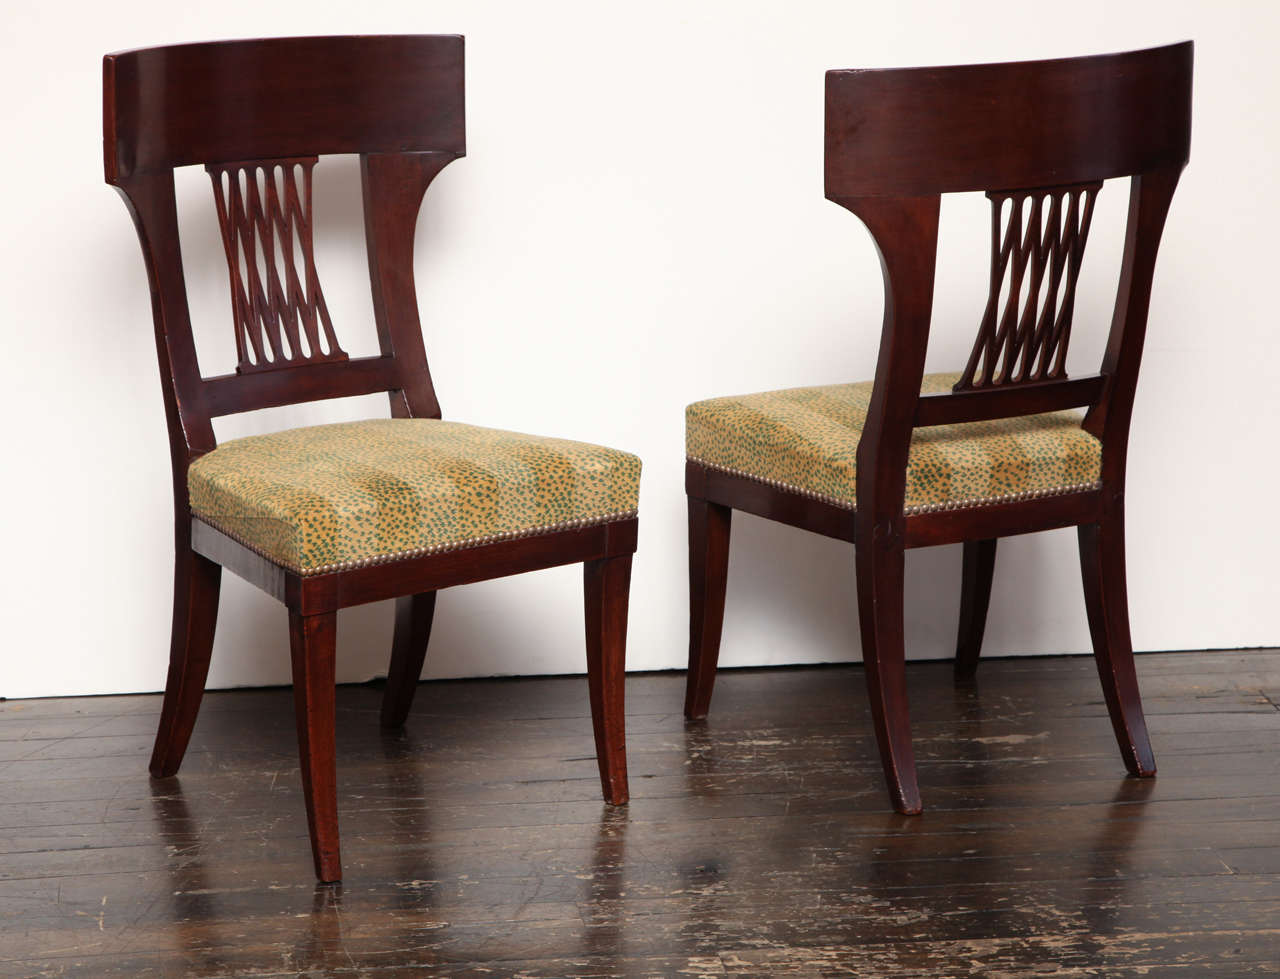 An Exceptional Pair of 19th Century French, Mahogany Side Chairs